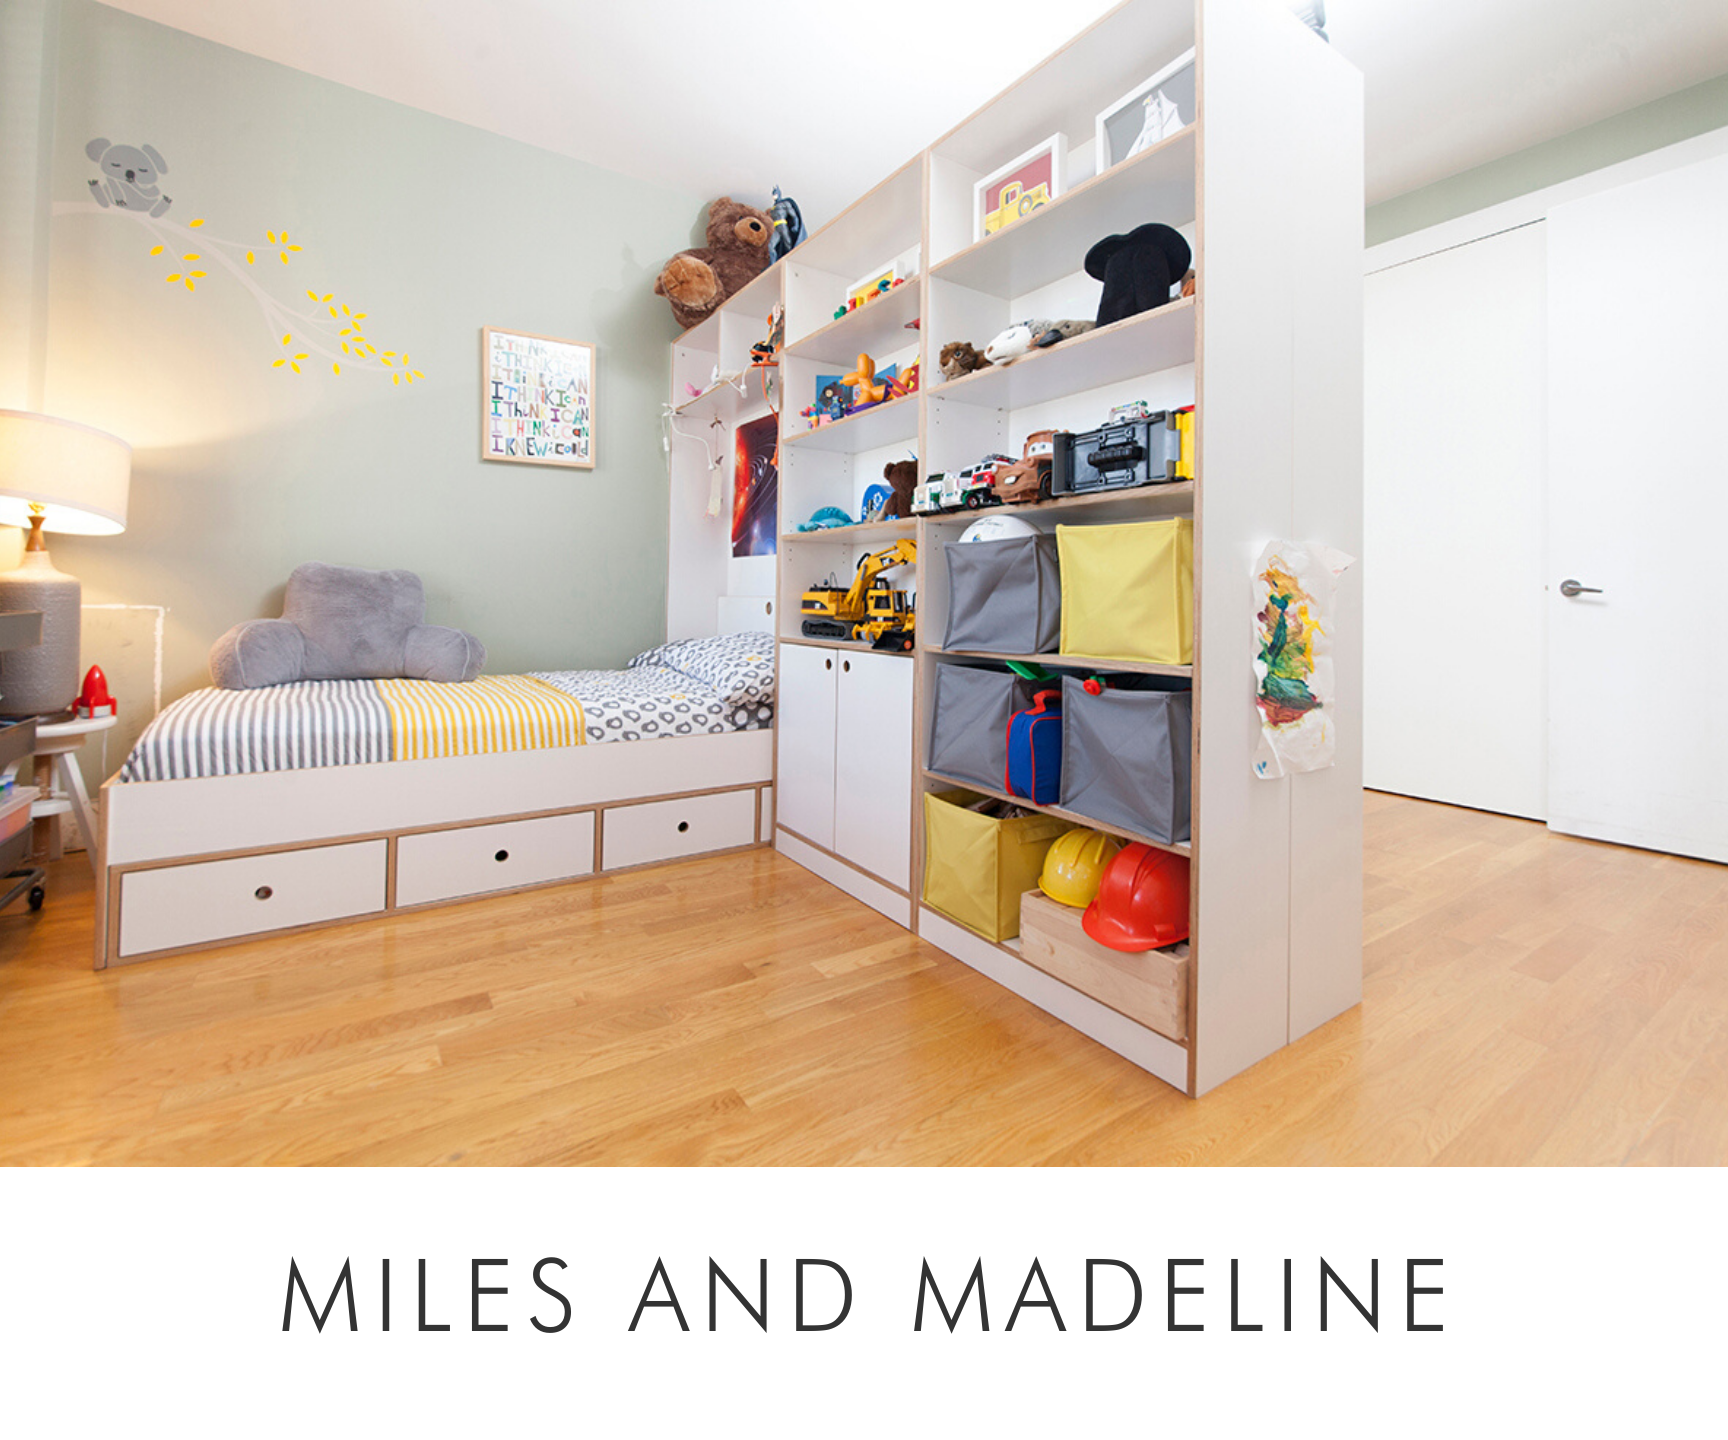 Bright children's room with a bed, playful storage unit filled with toys, and whimsical wall decals.